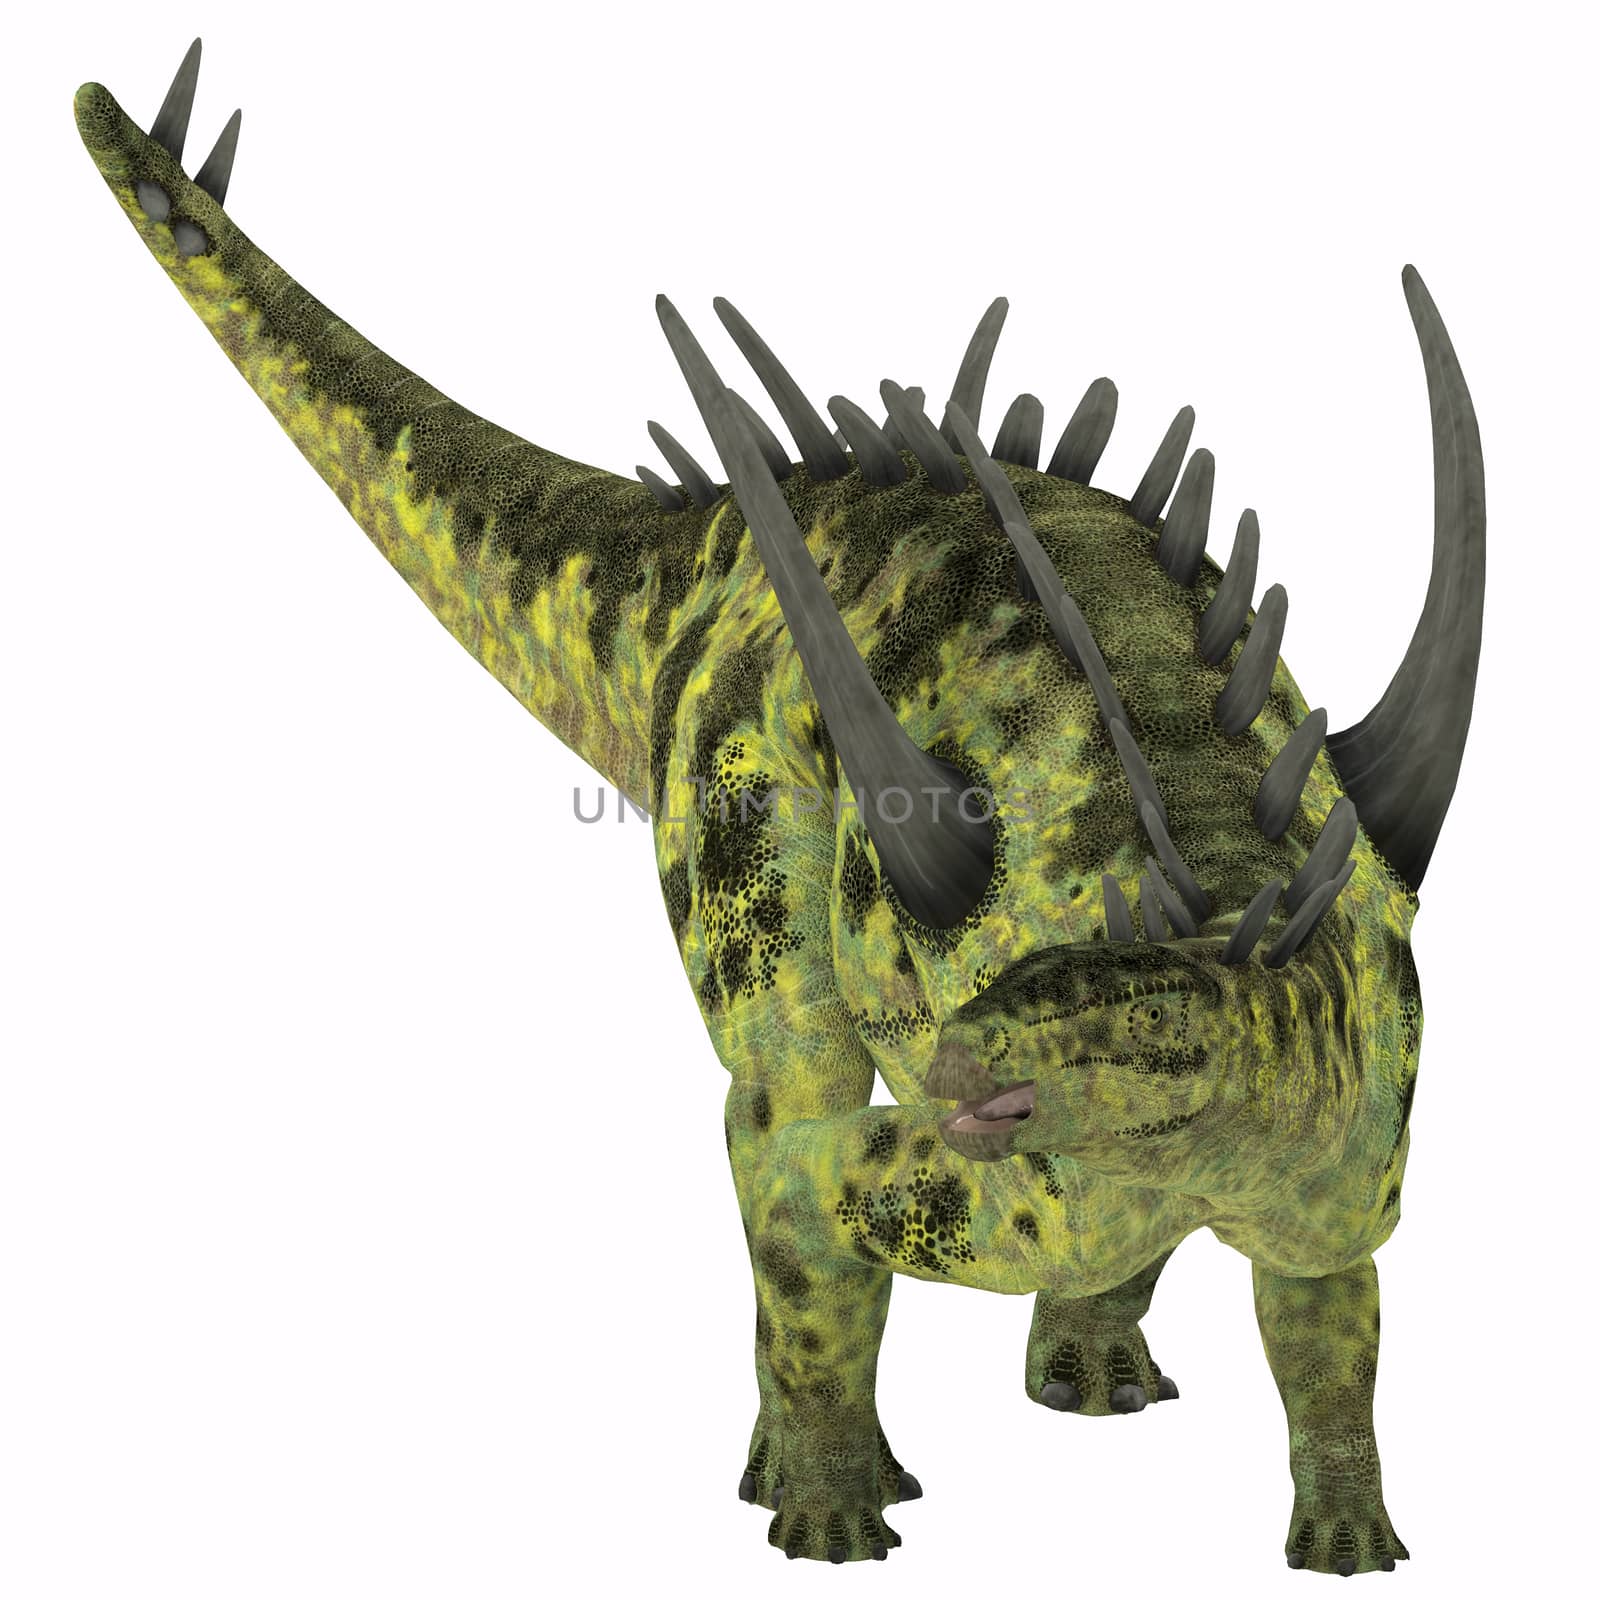 Gigantspinosaurus was a herbivorous Stegosaur dinosaur that lived in the Jurassic Age of China.